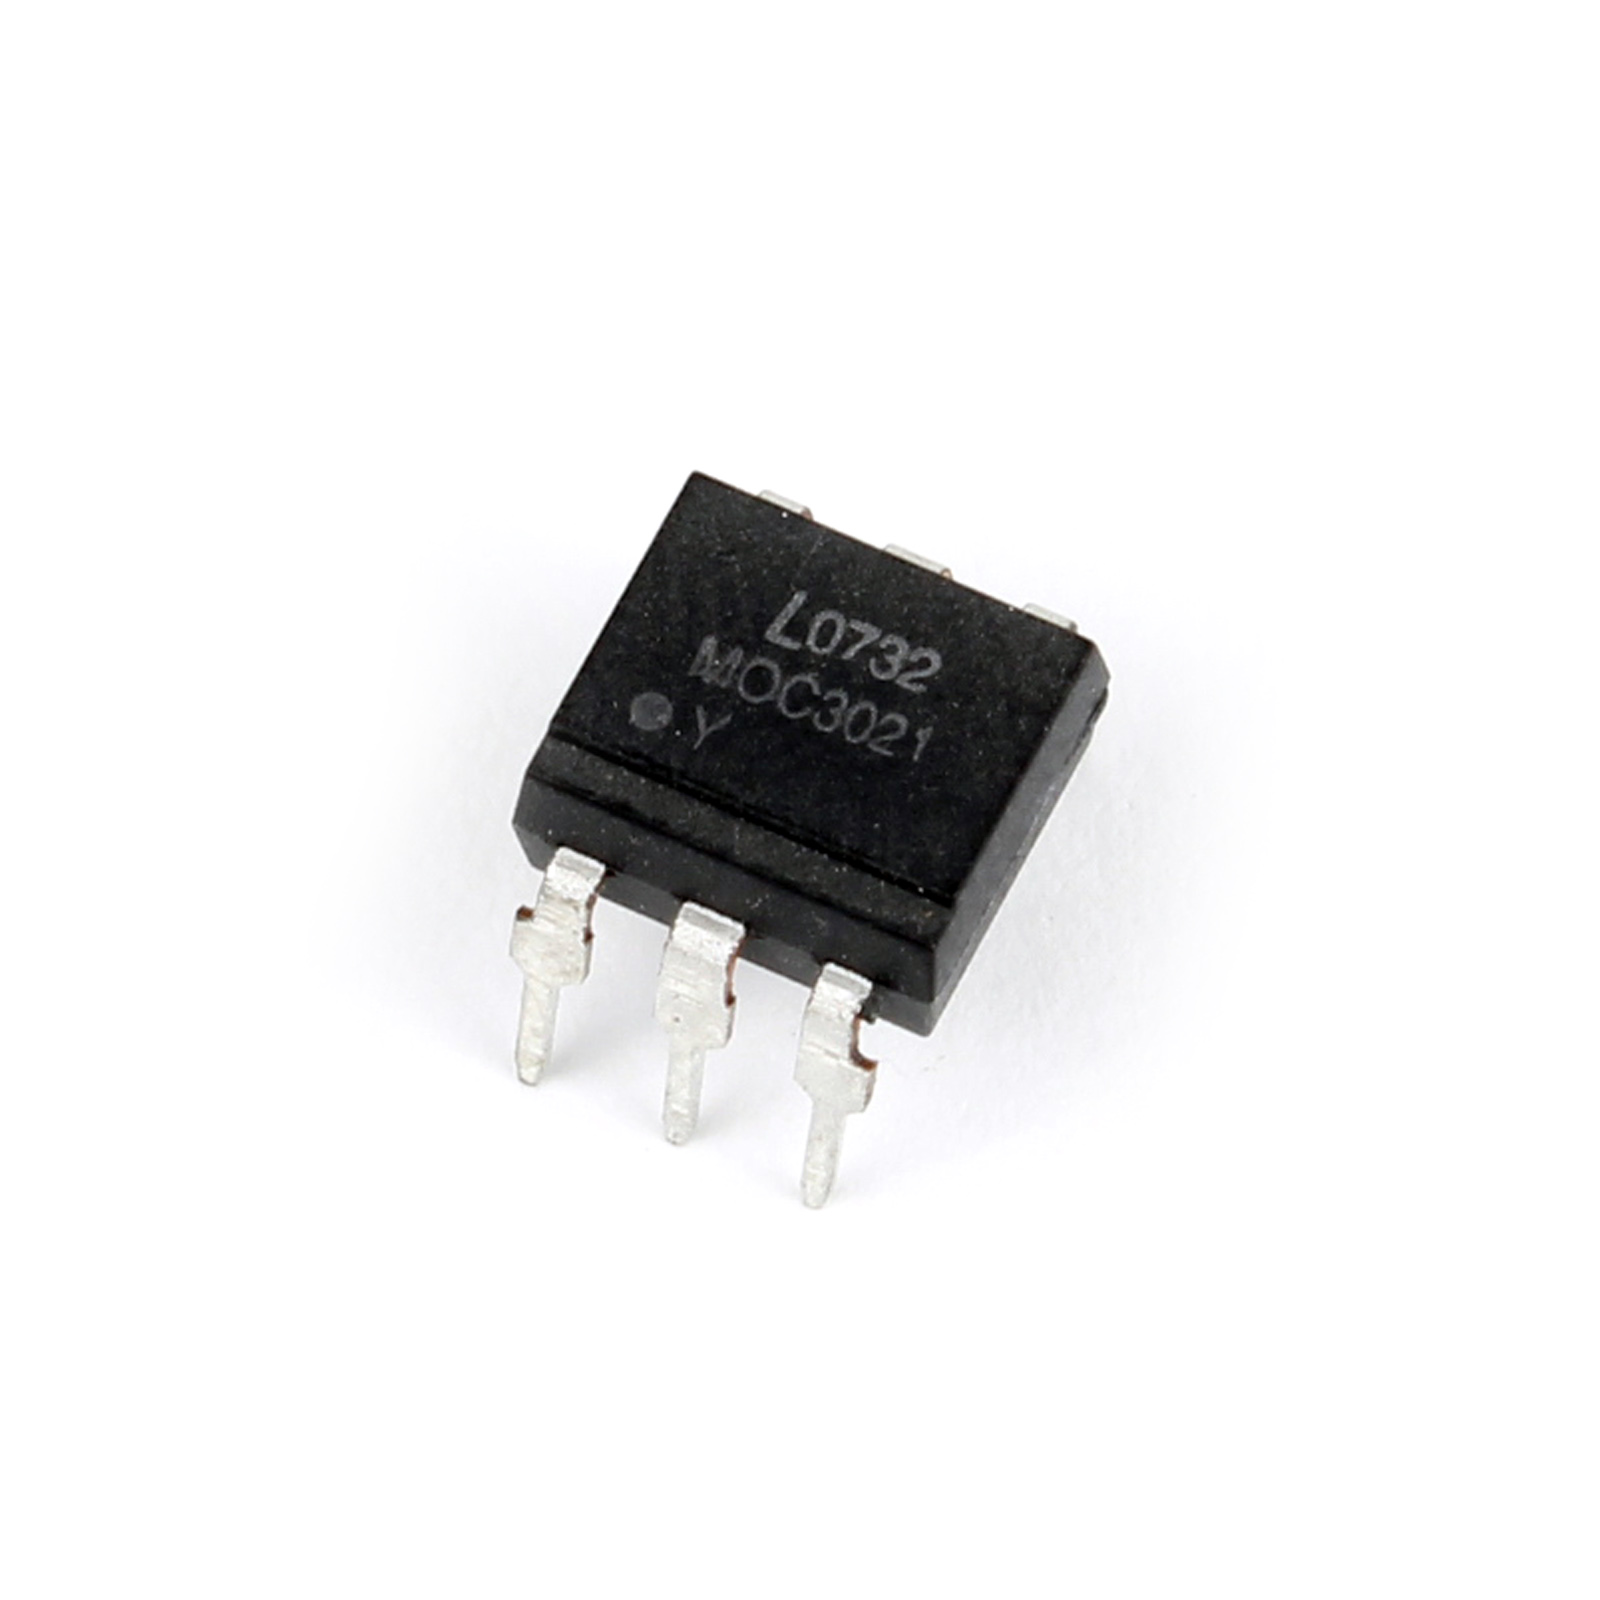 AOYUE Spare Part COSMO / MOC 3021 Optocoupler